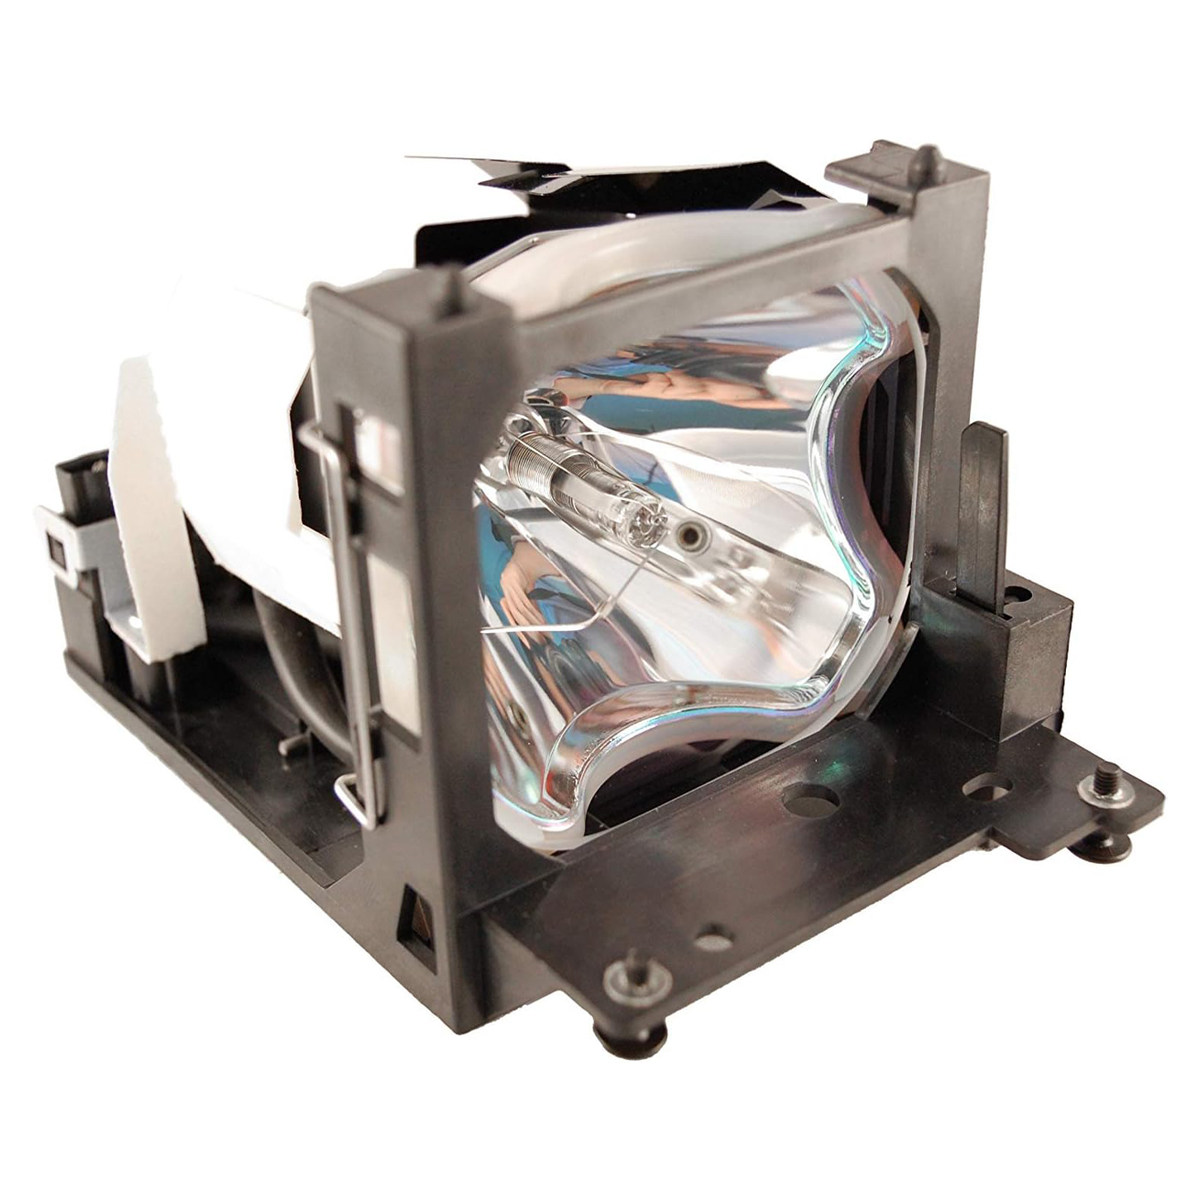 Replacement Projector lamp DT00471 For Hitachi CP-S420 CP -X430 CP-X430W CP-X430WA